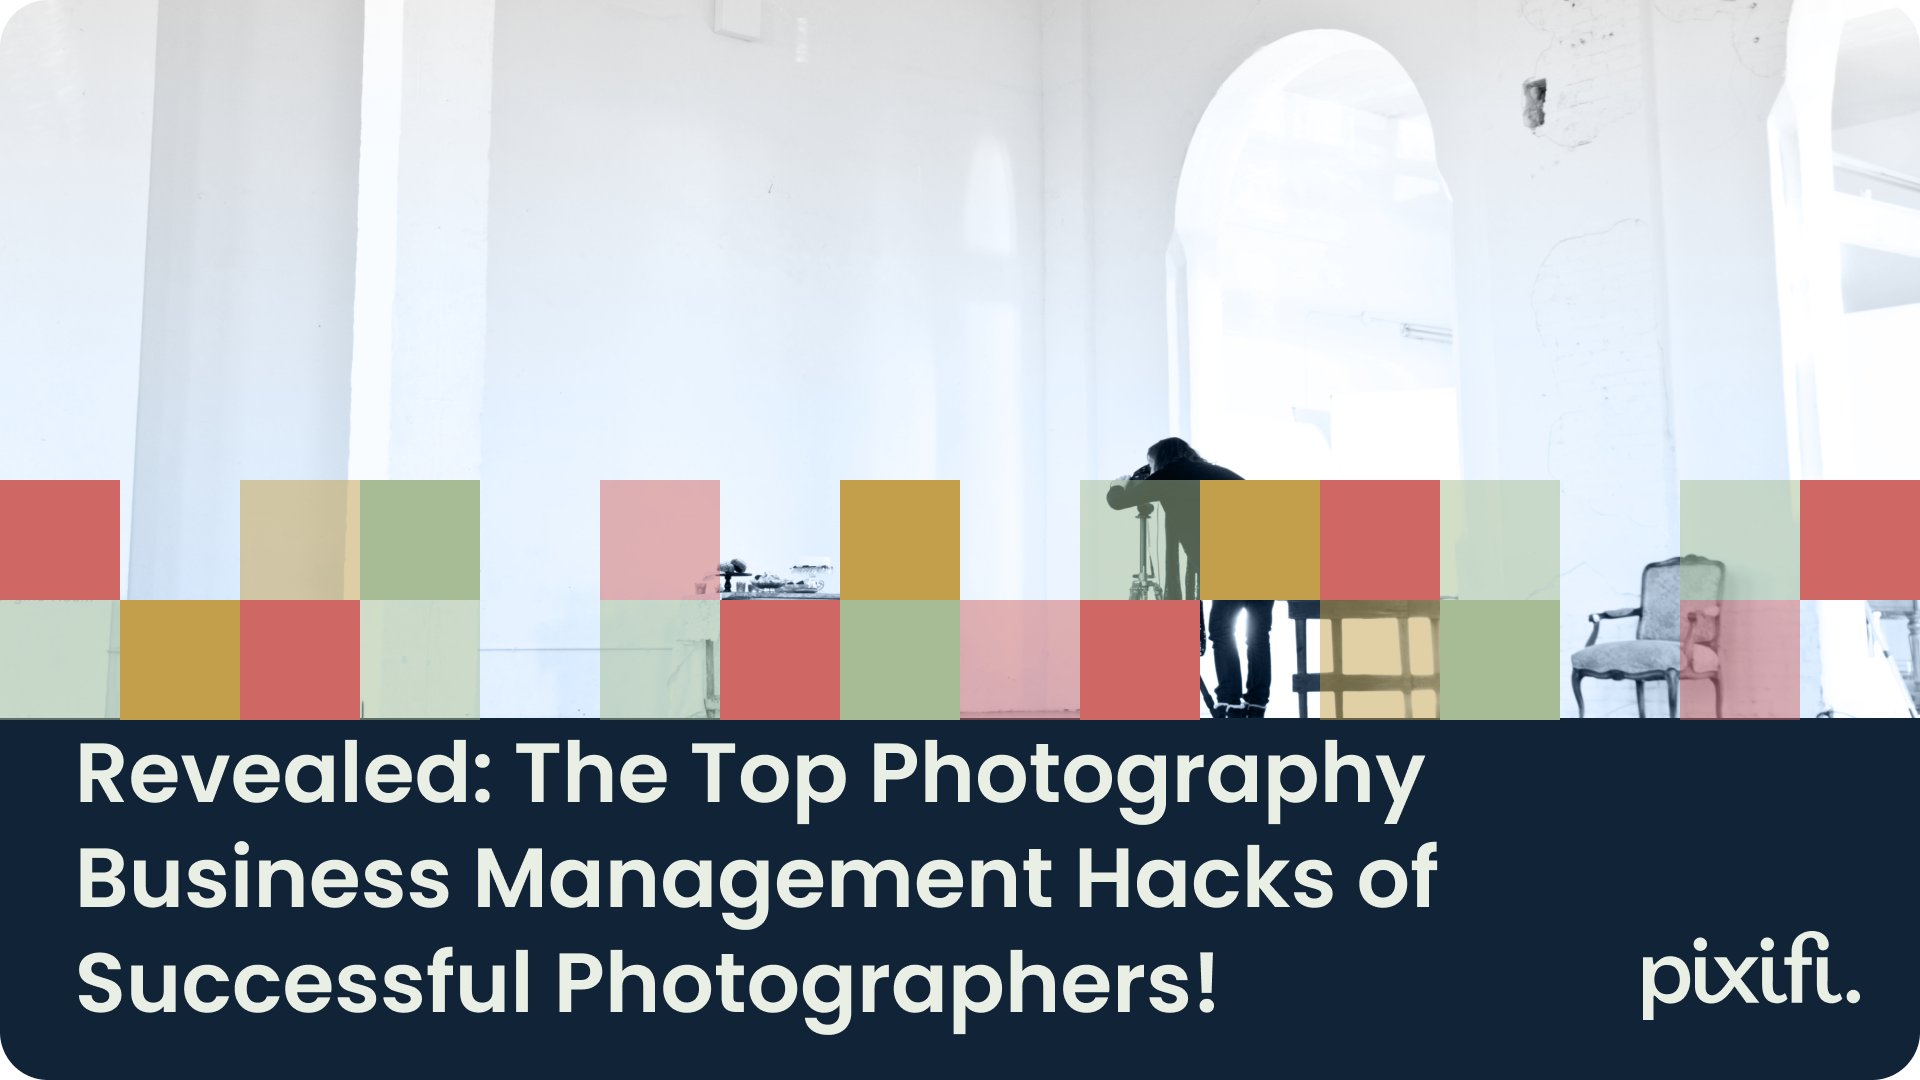 Revealed: The Top Photography Business Management Hacks of Successful Photographers!